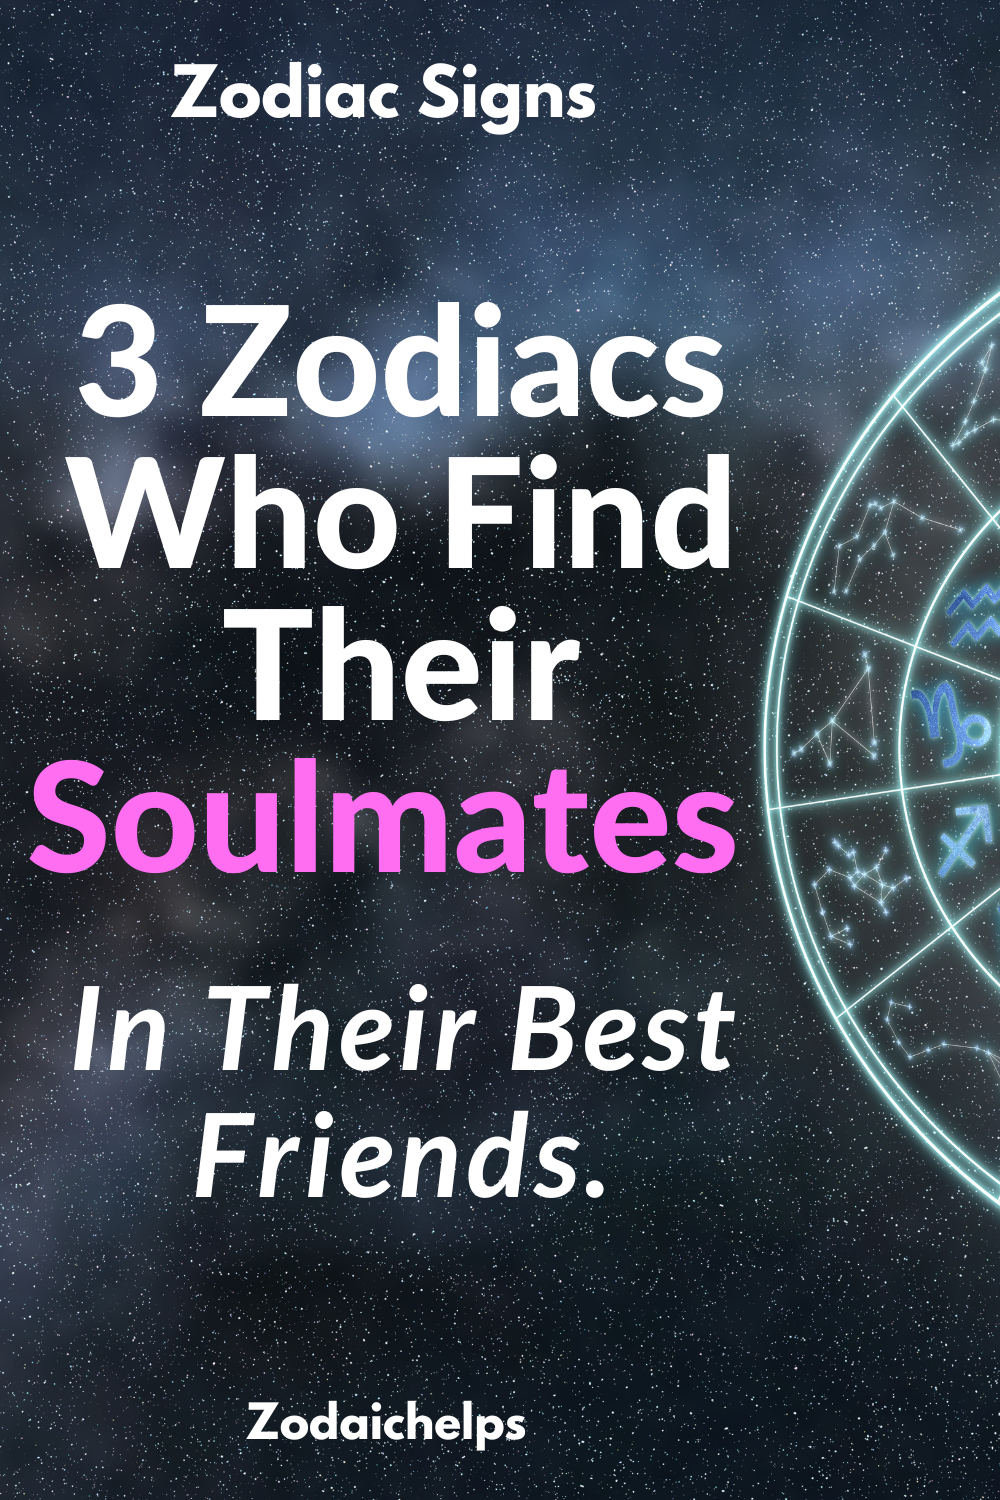 3 Zodiacs Who Find Their Soulmates In Their Best Friends